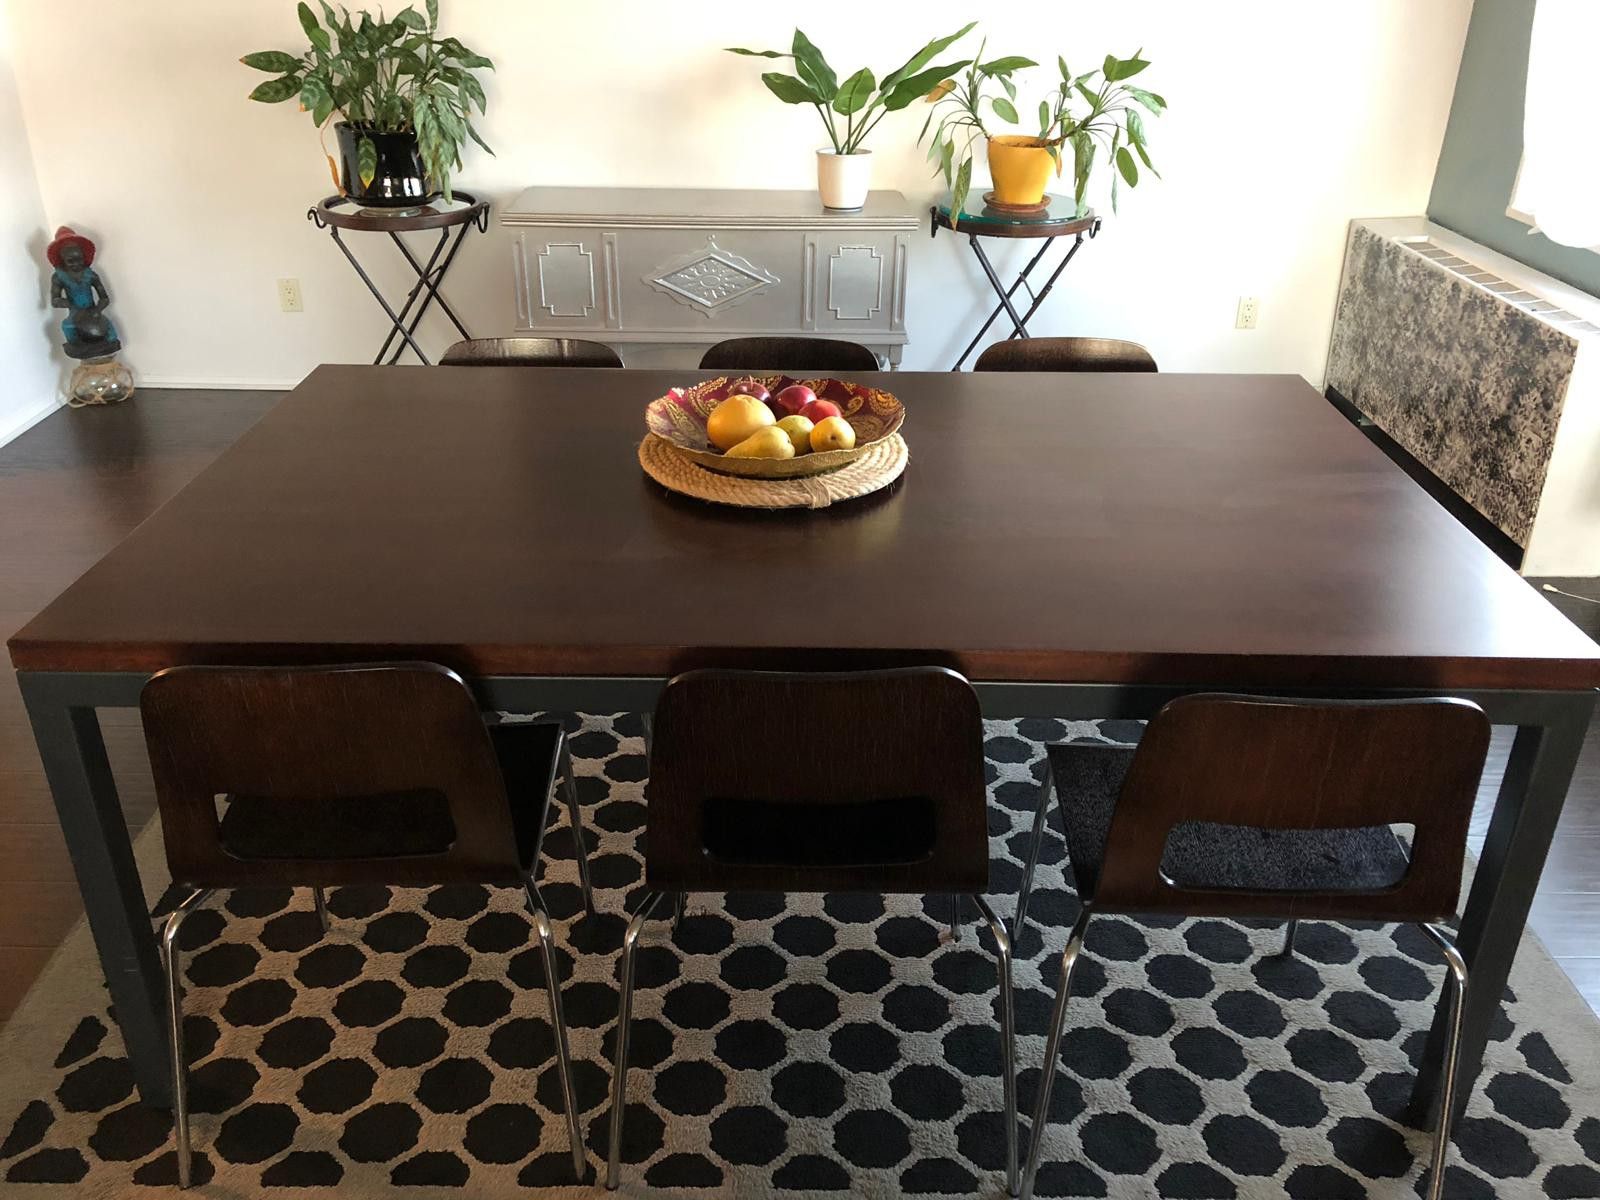 Solid cherrywood table with 4 chair